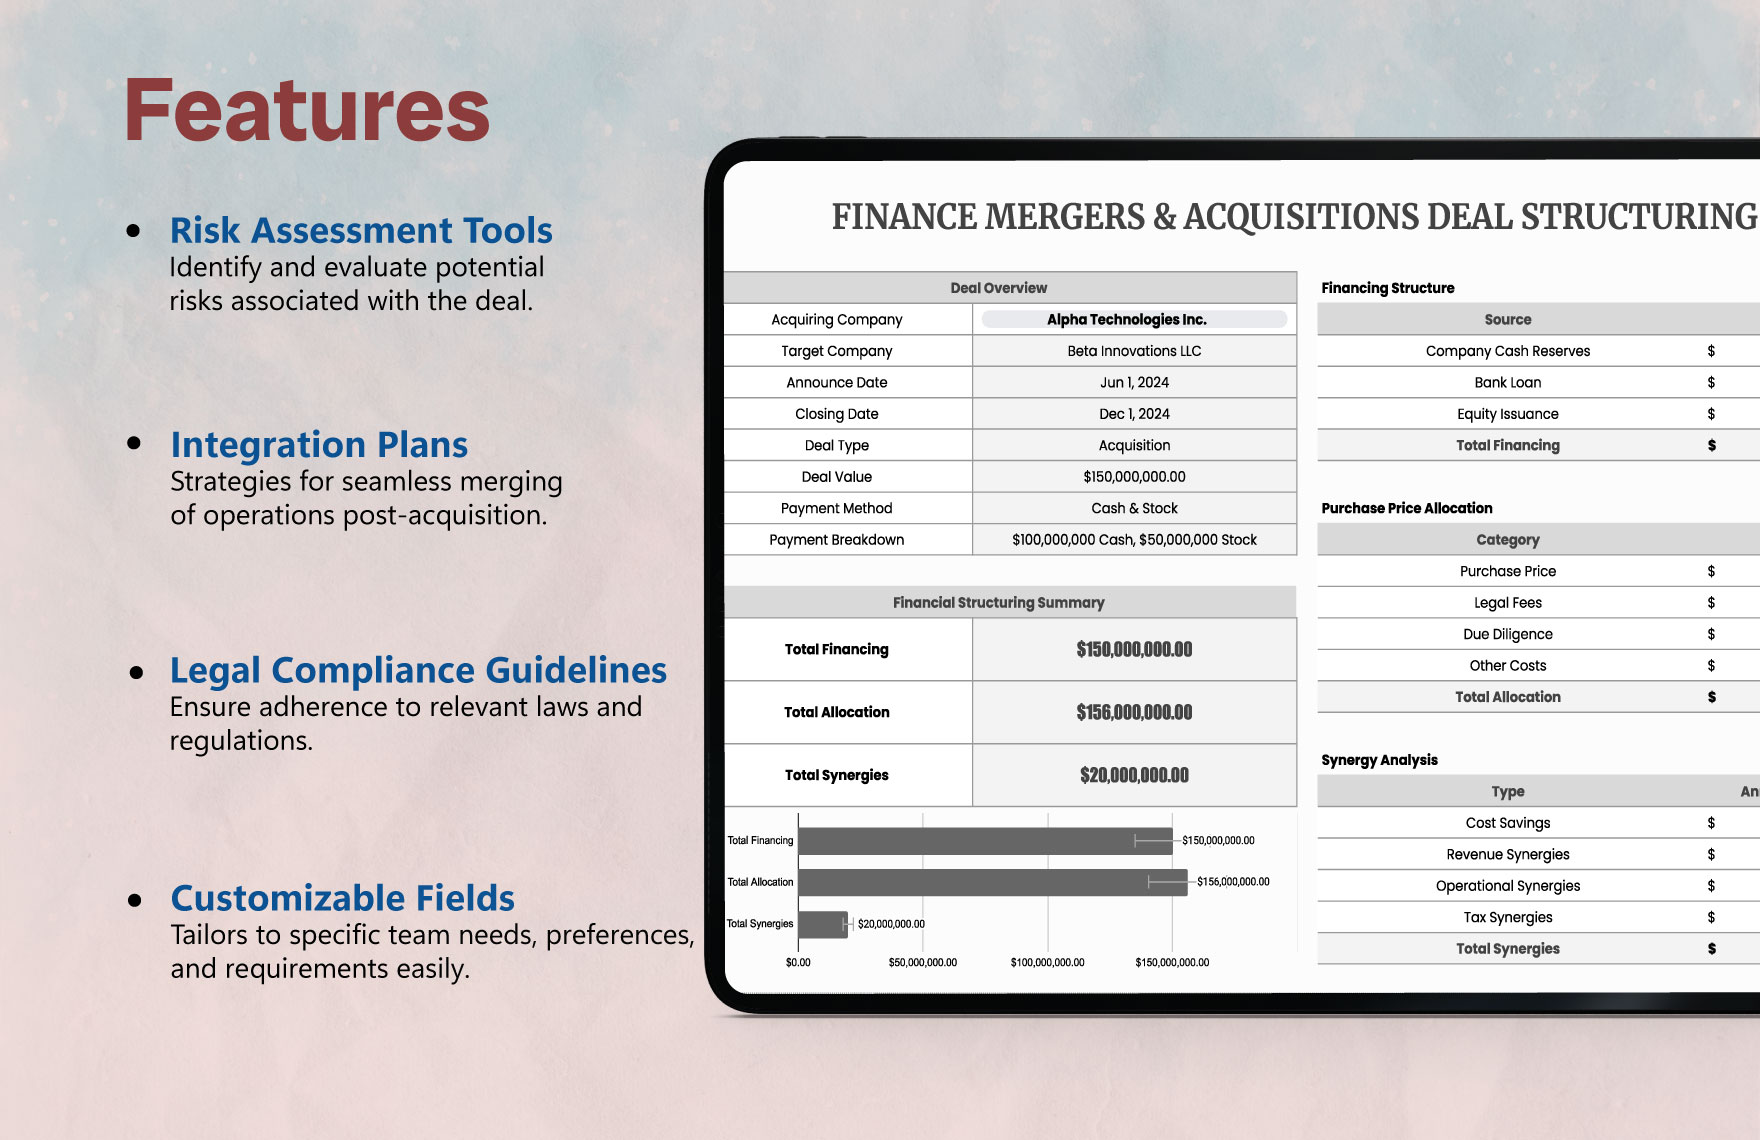 Finance Mergers & Acquisitions Deal Structuring Template